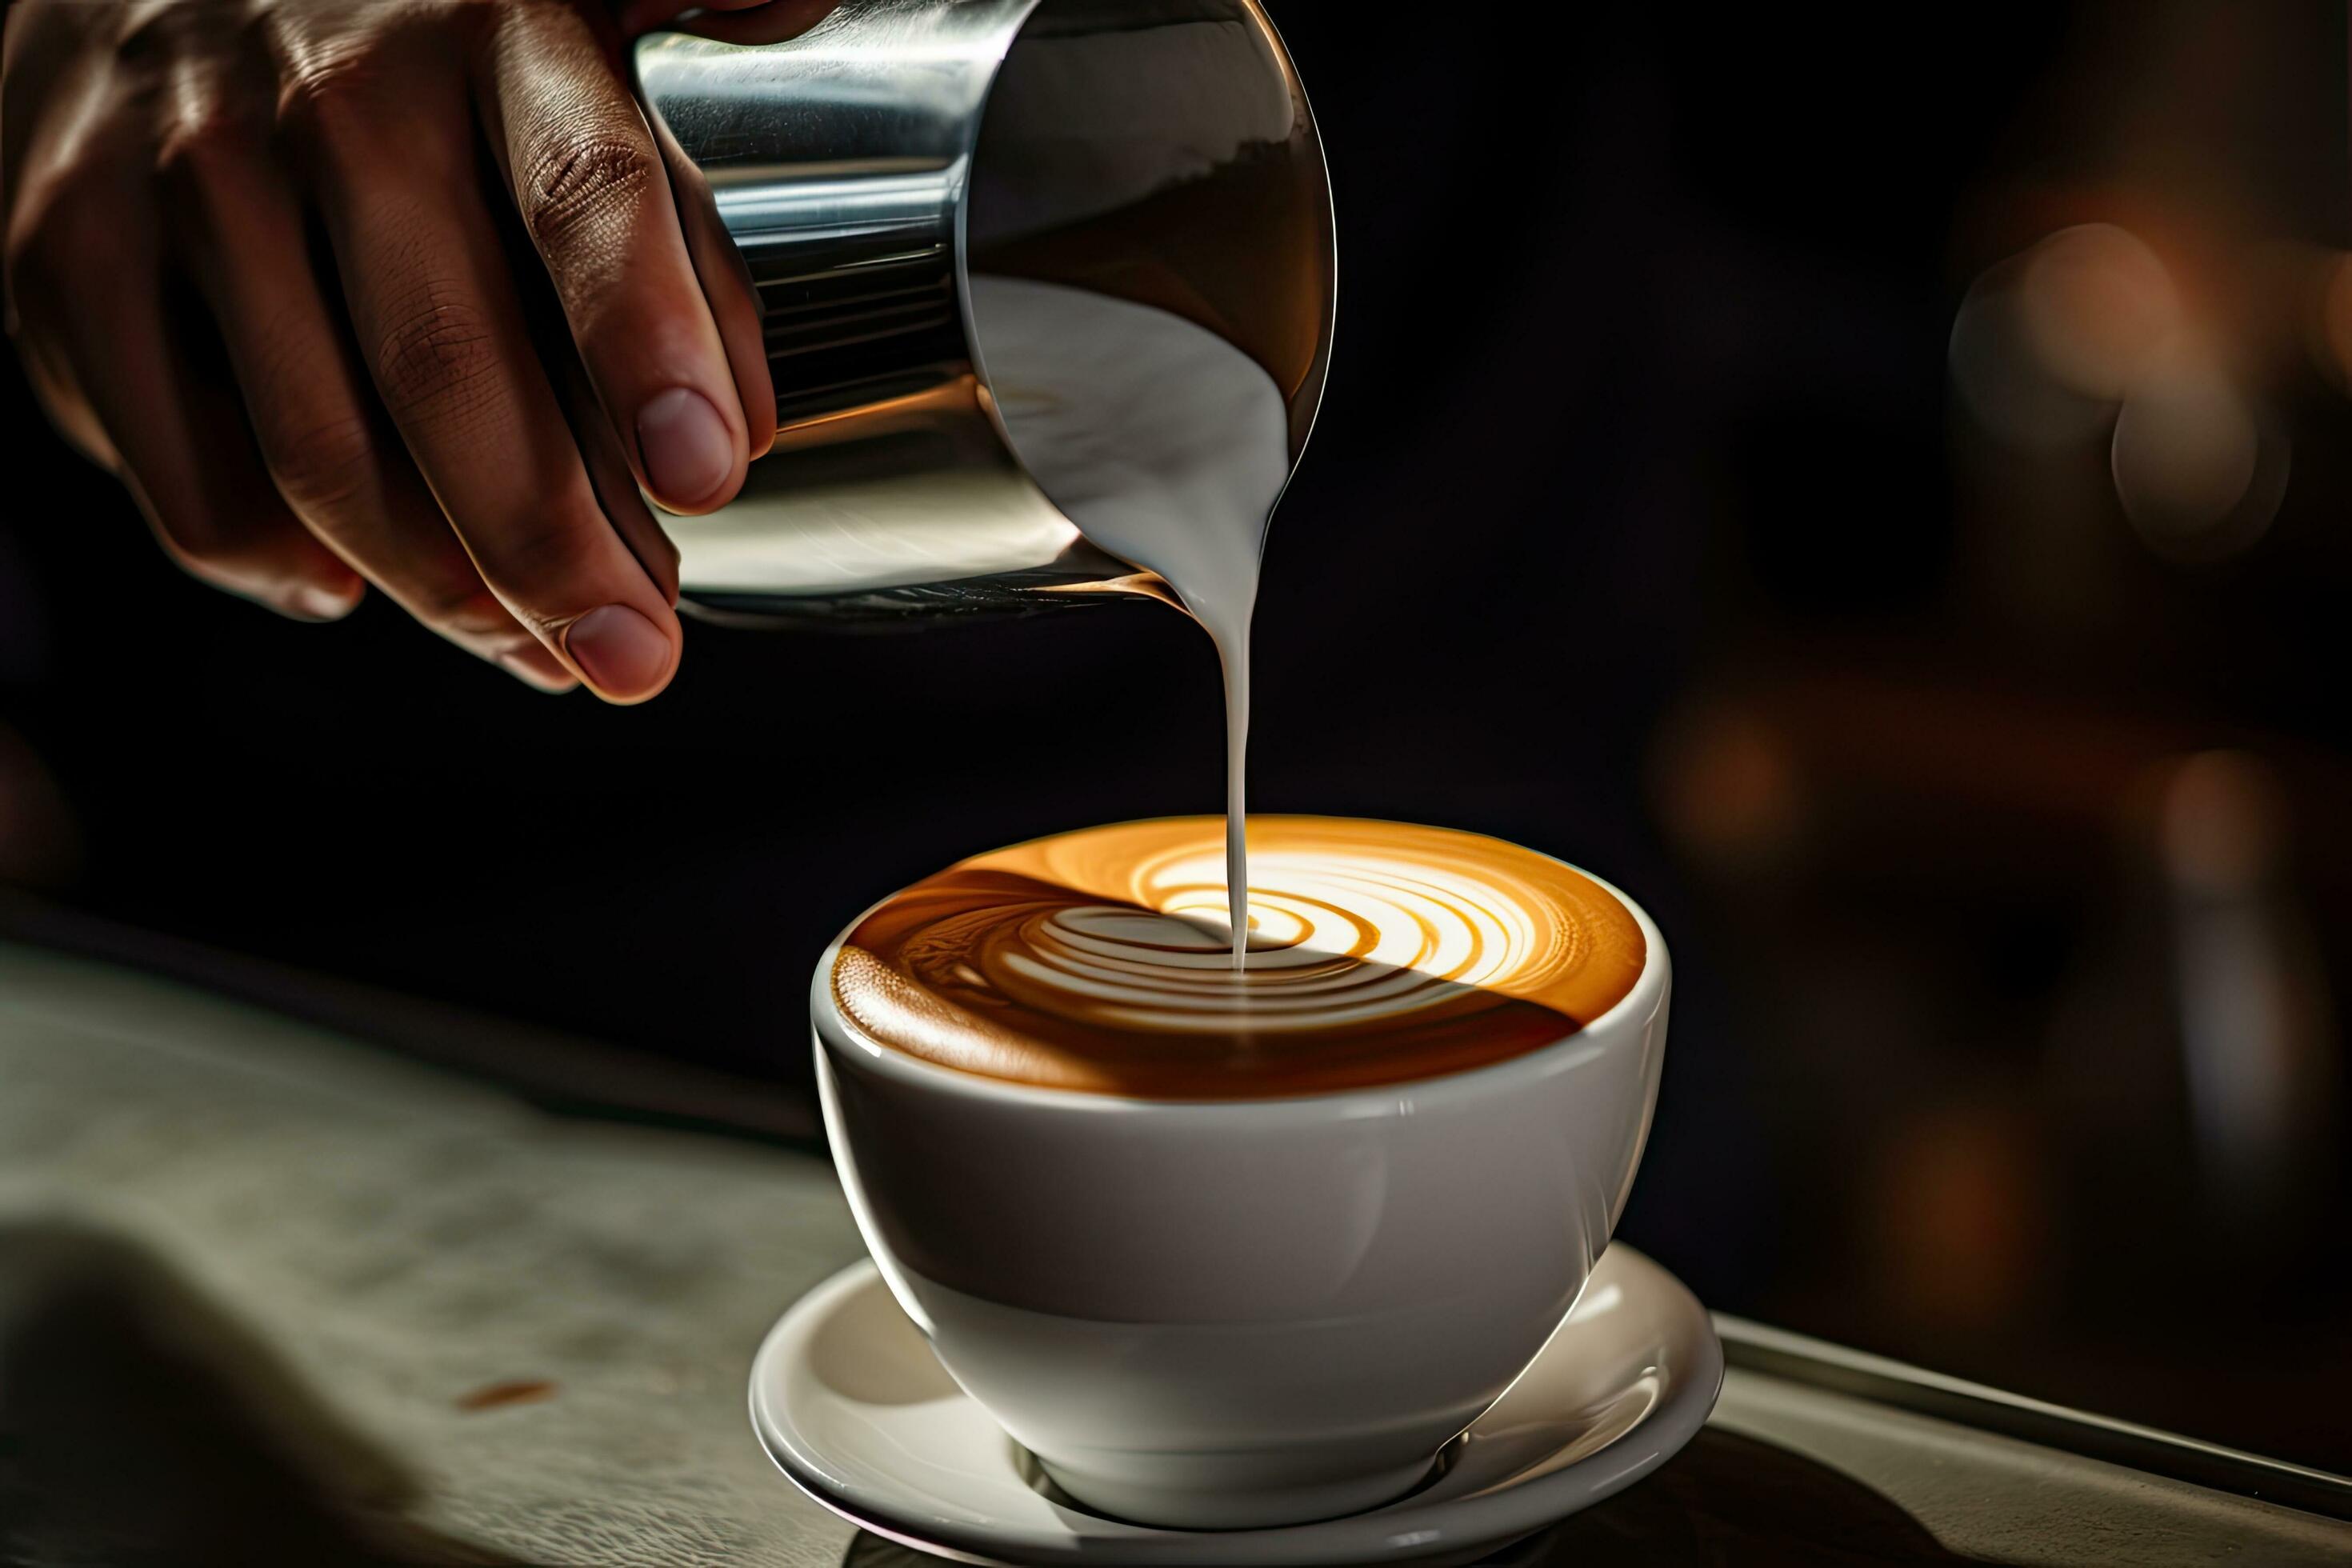 https://static.vecteezy.com/system/resources/previews/027/160/693/large_2x/barista-pouring-milk-in-a-cup-of-coffee-close-up-barista-pouring-milk-into-a-cup-of-latte-art-coffee-a-coffee-cup-in-a-close-up-held-by-a-baristas-hand-and-pouring-coffee-ai-generated-free-photo.jpg